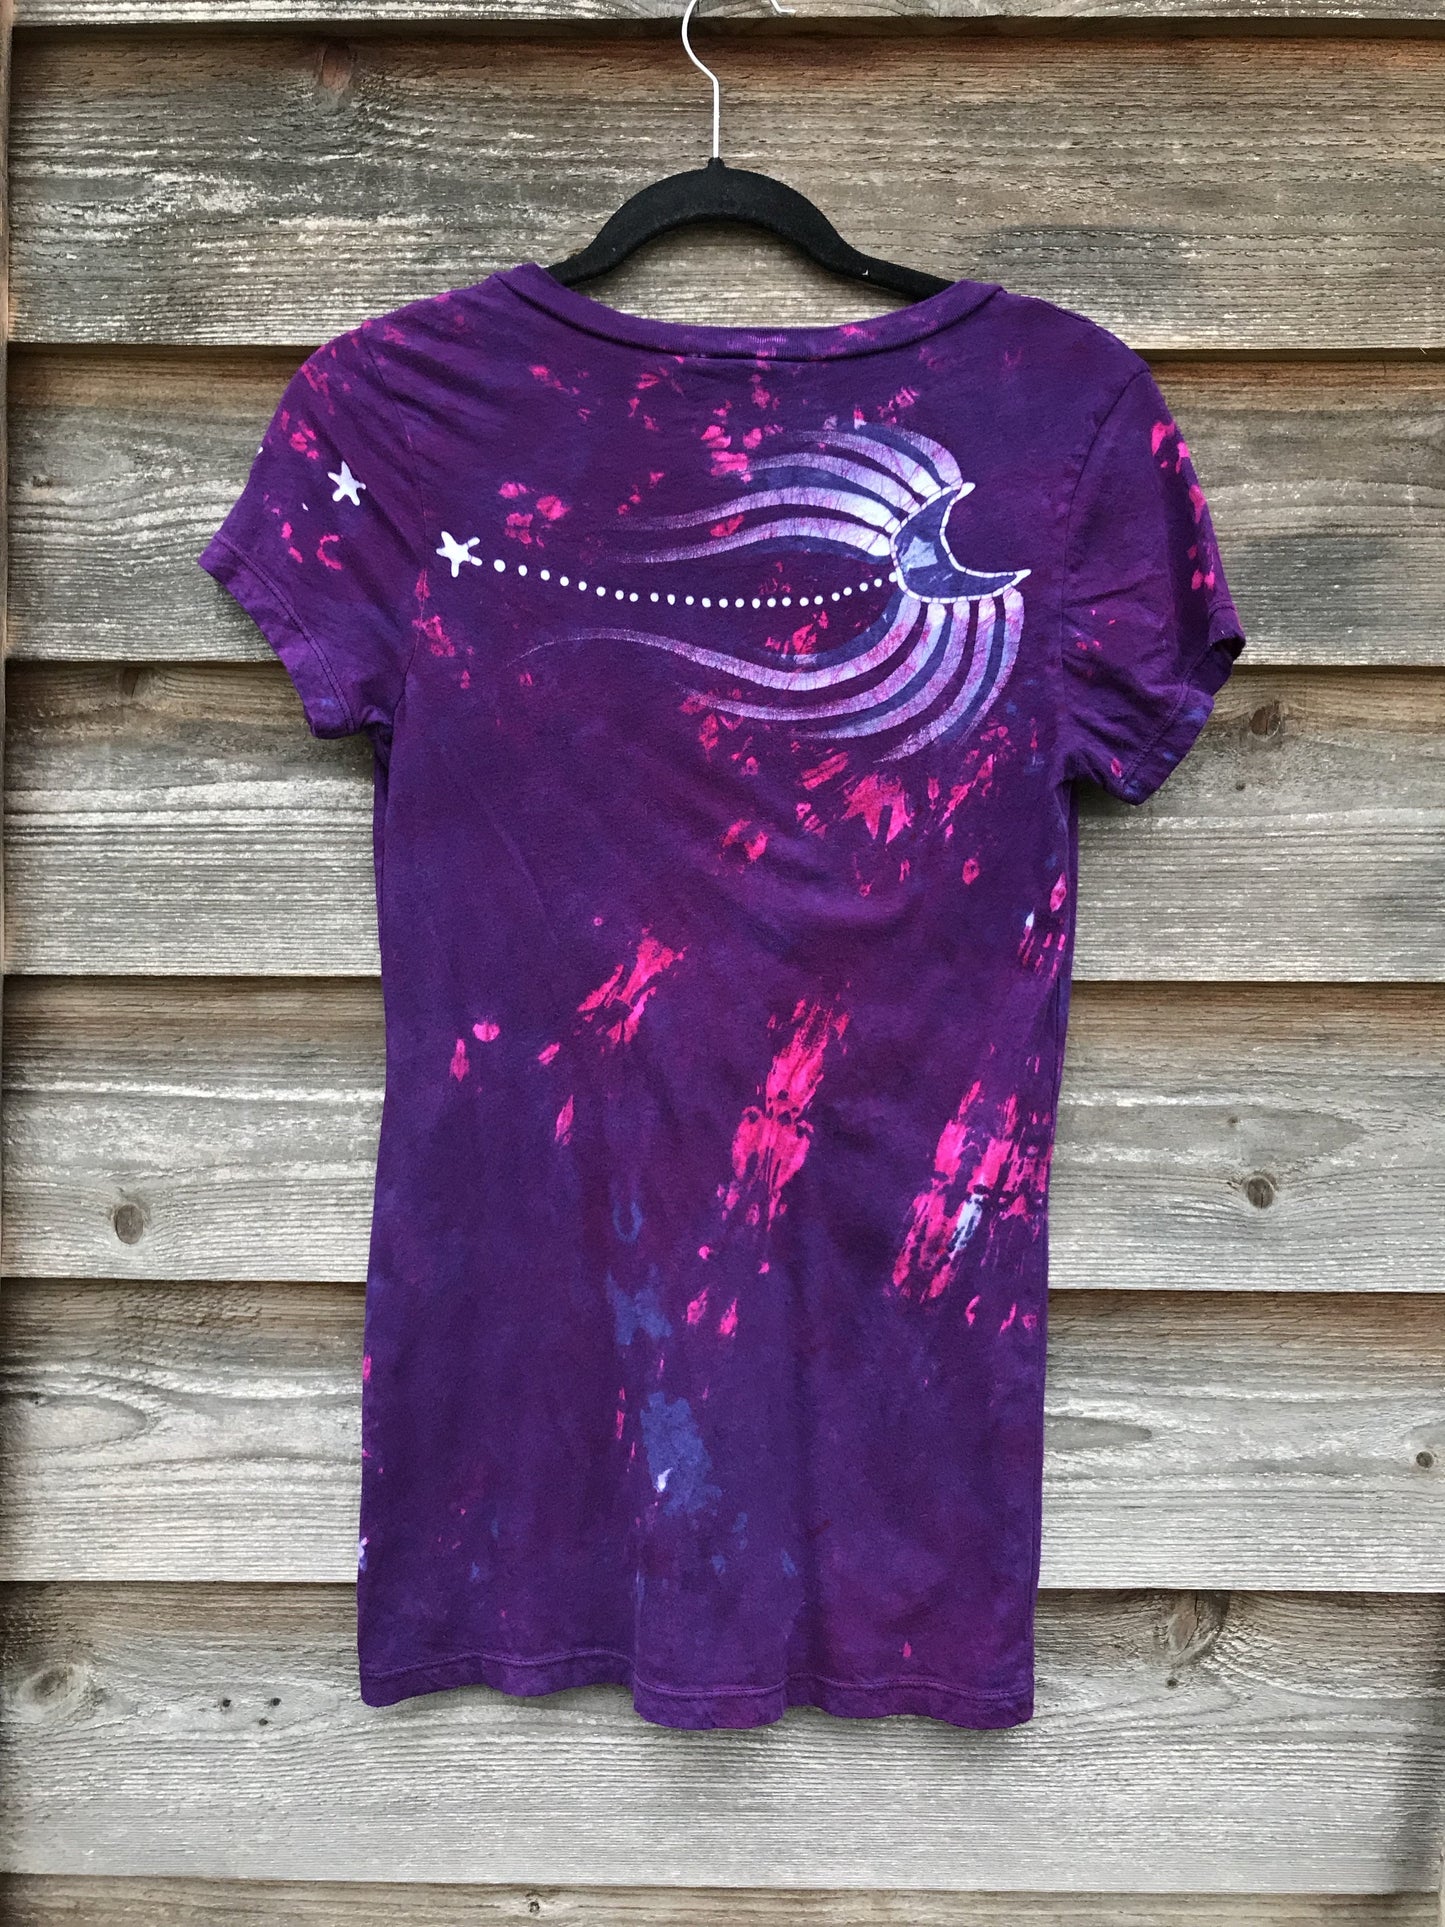 Center Star in Bright Purple Hand Painted Vneck Tee